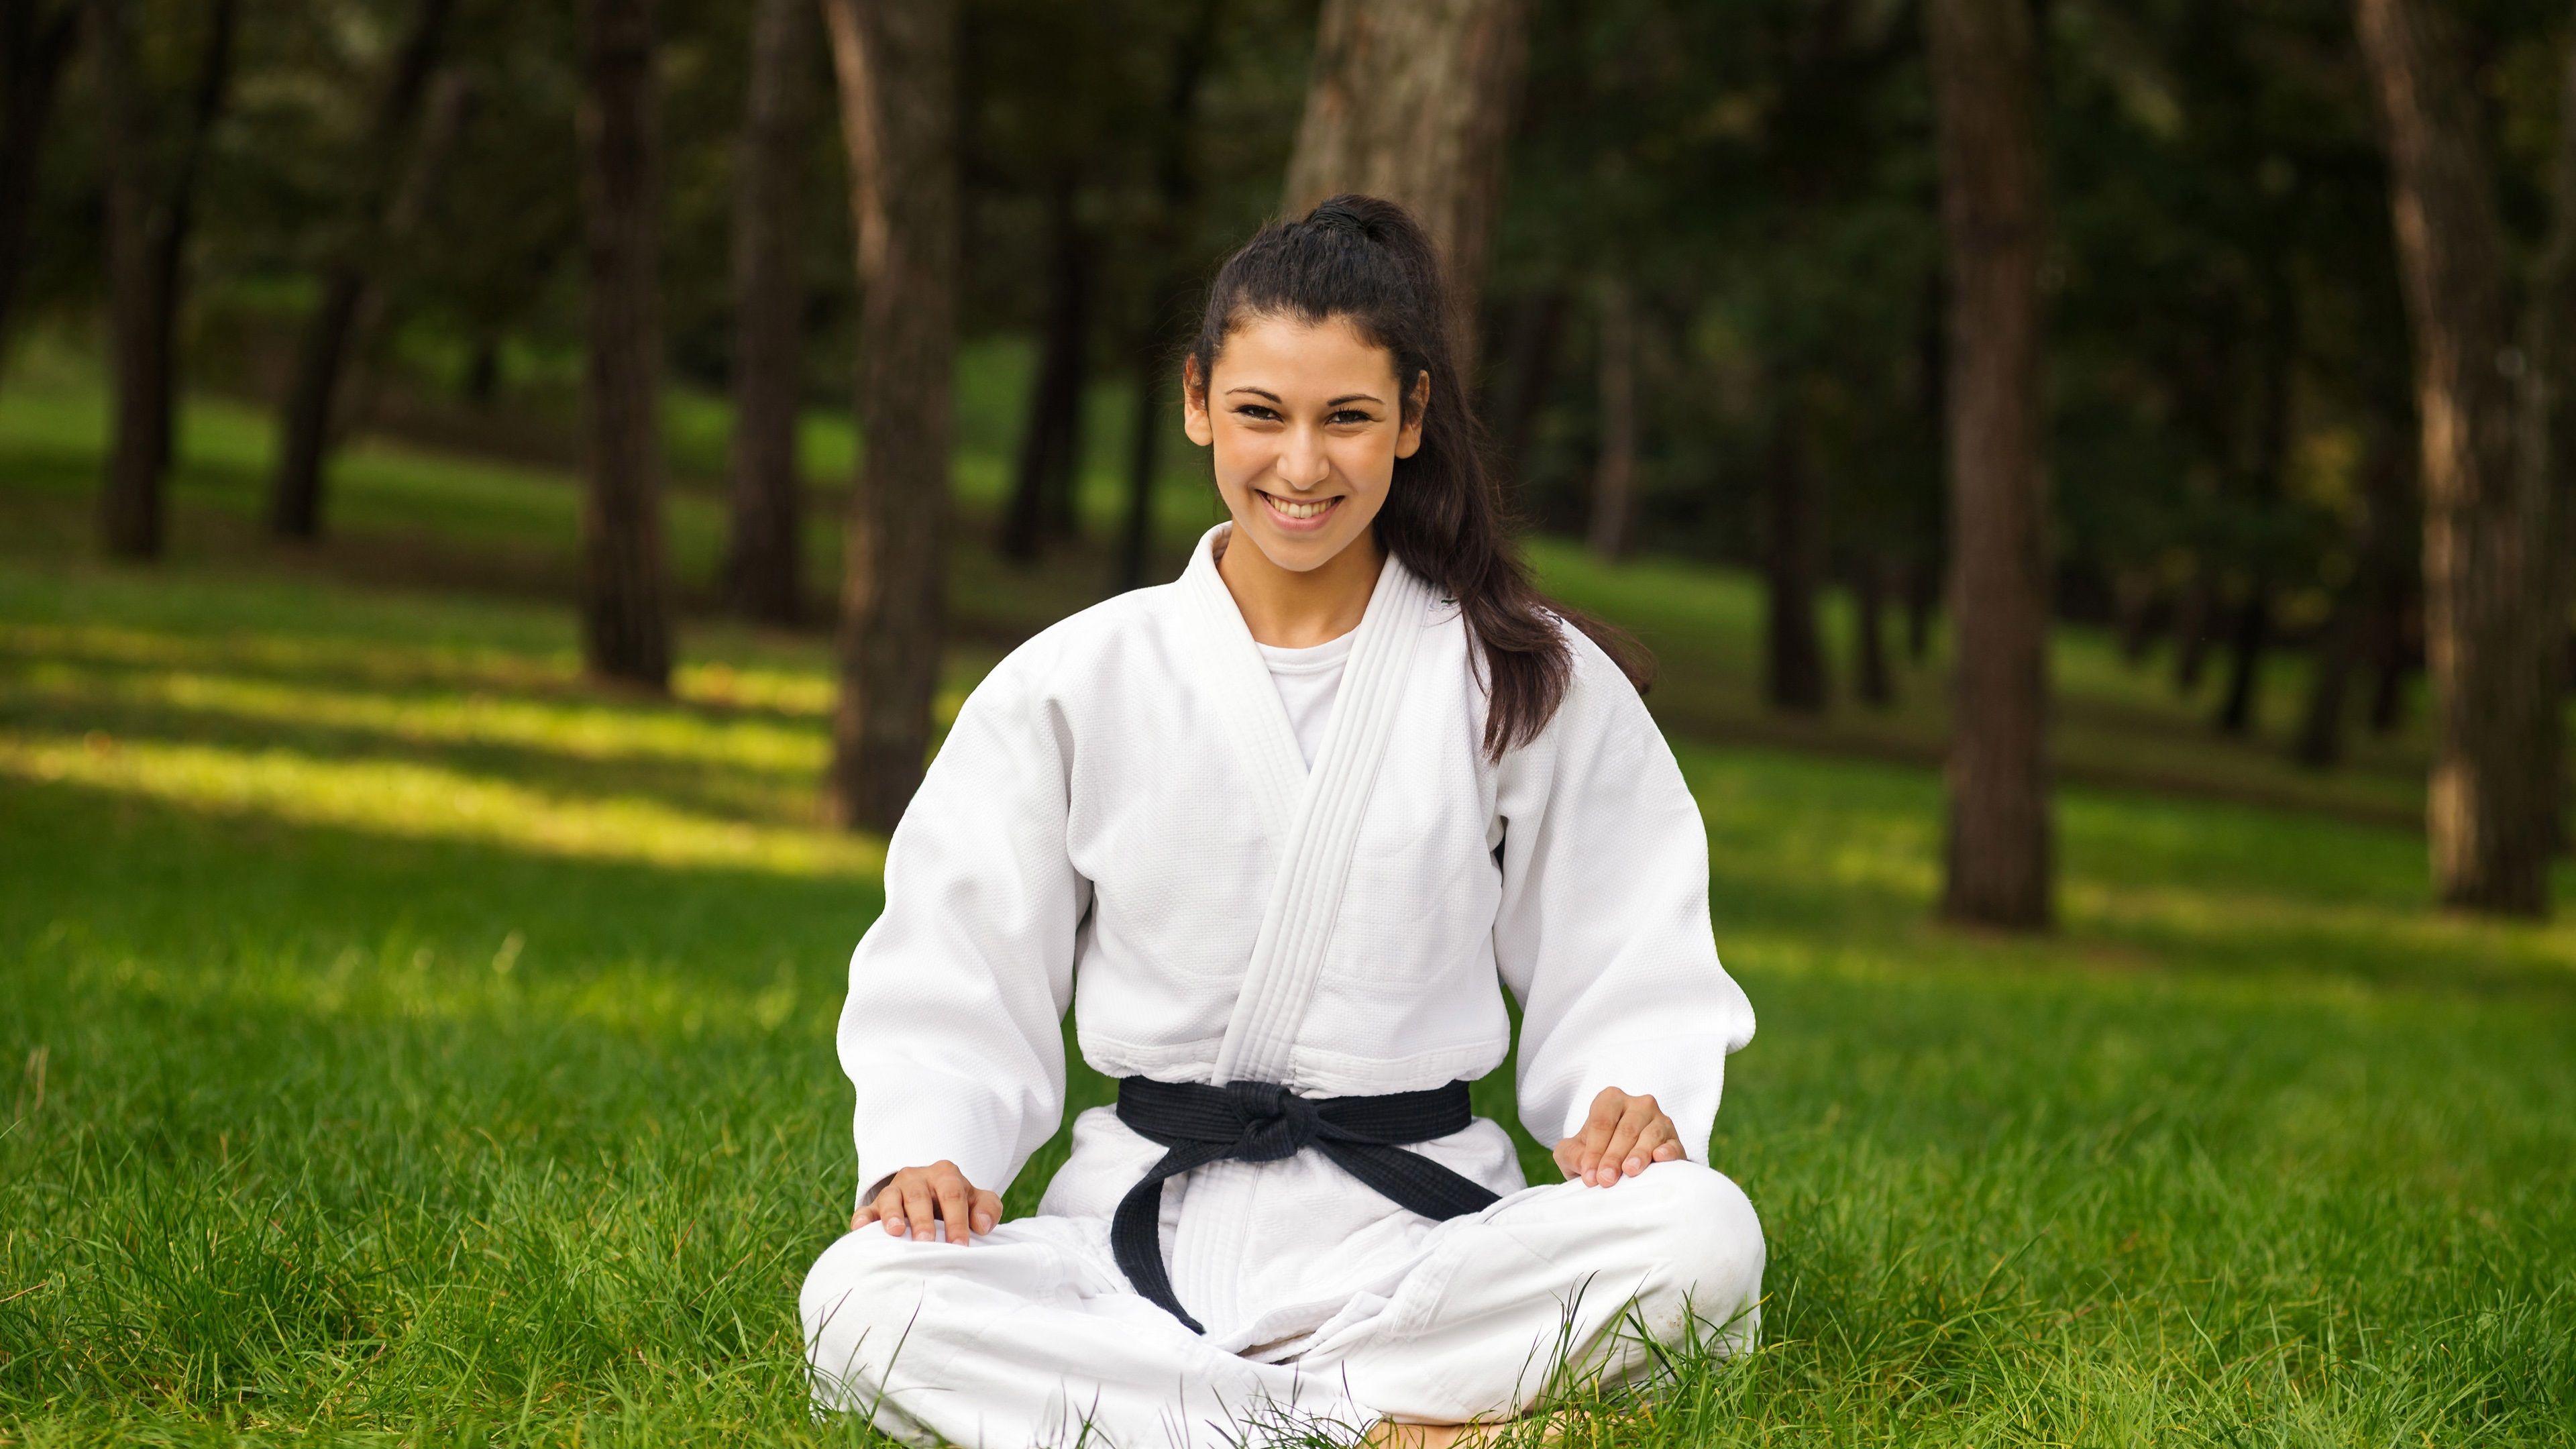 Wallpaper Karate, white clothes girl, smile, grass 3840x2160 UHD 4K Picture, Image